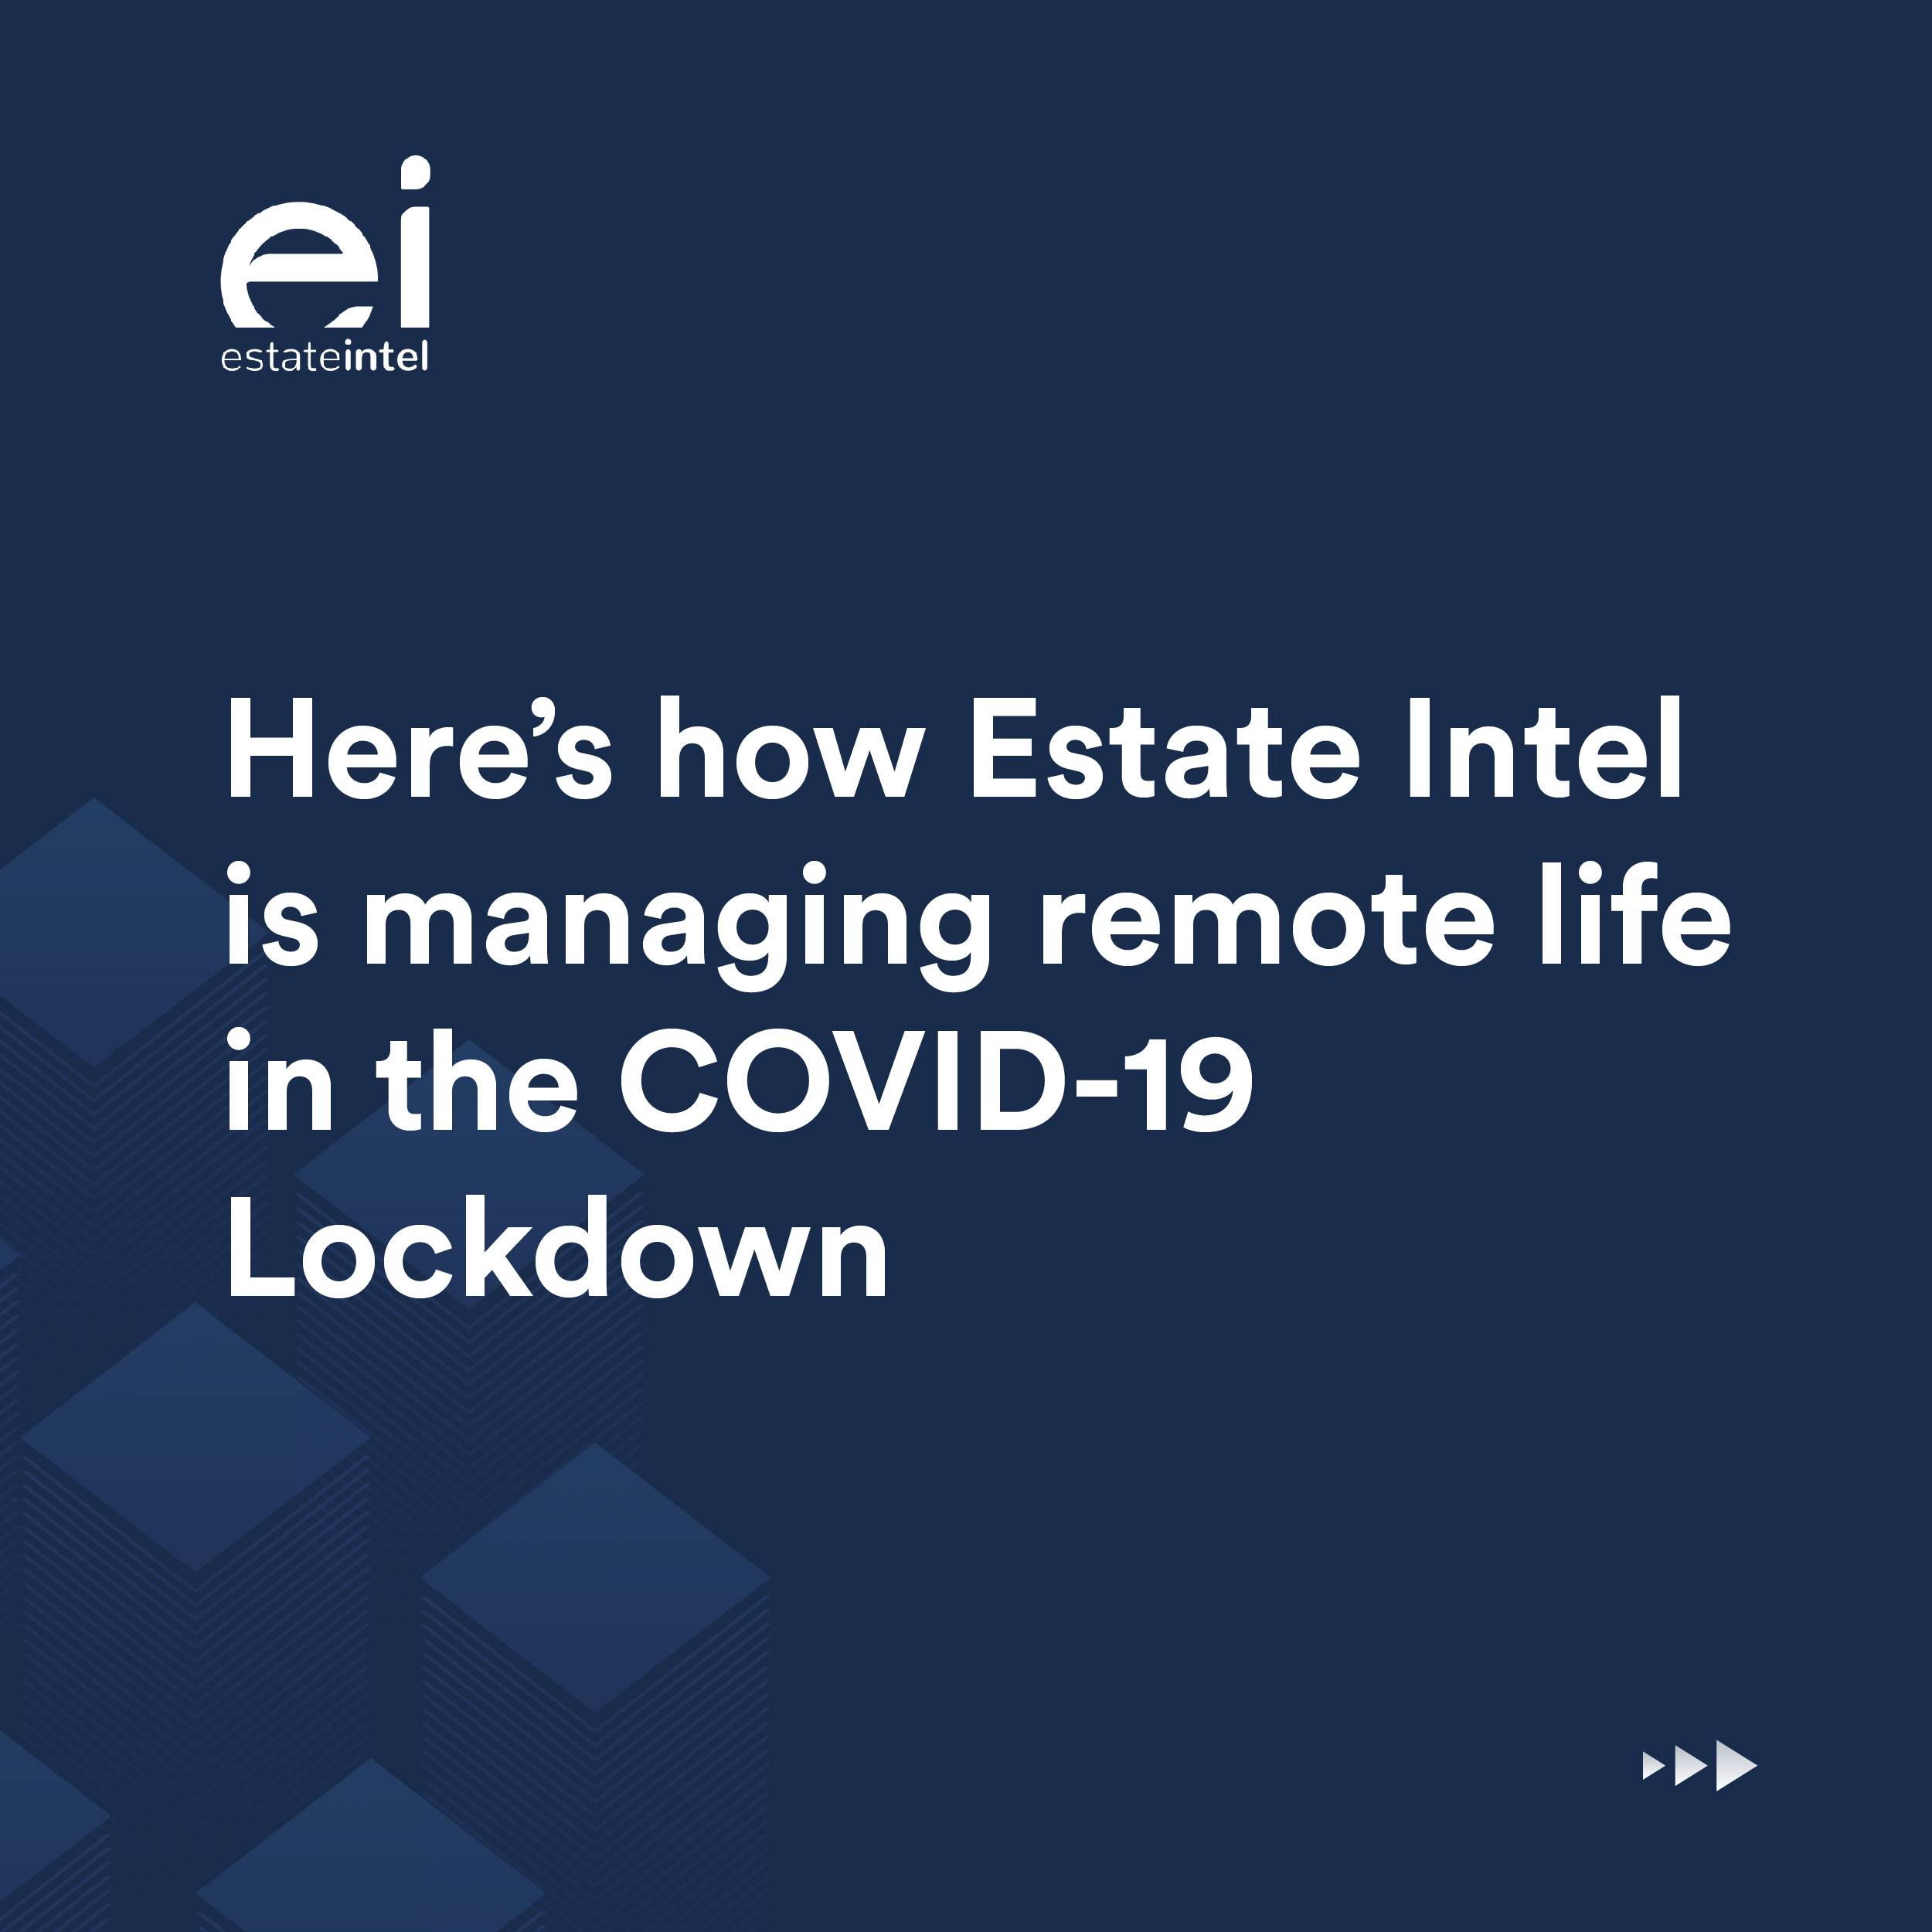 ei’s Top Tools for managing remote work during the COVID-19 lockdown